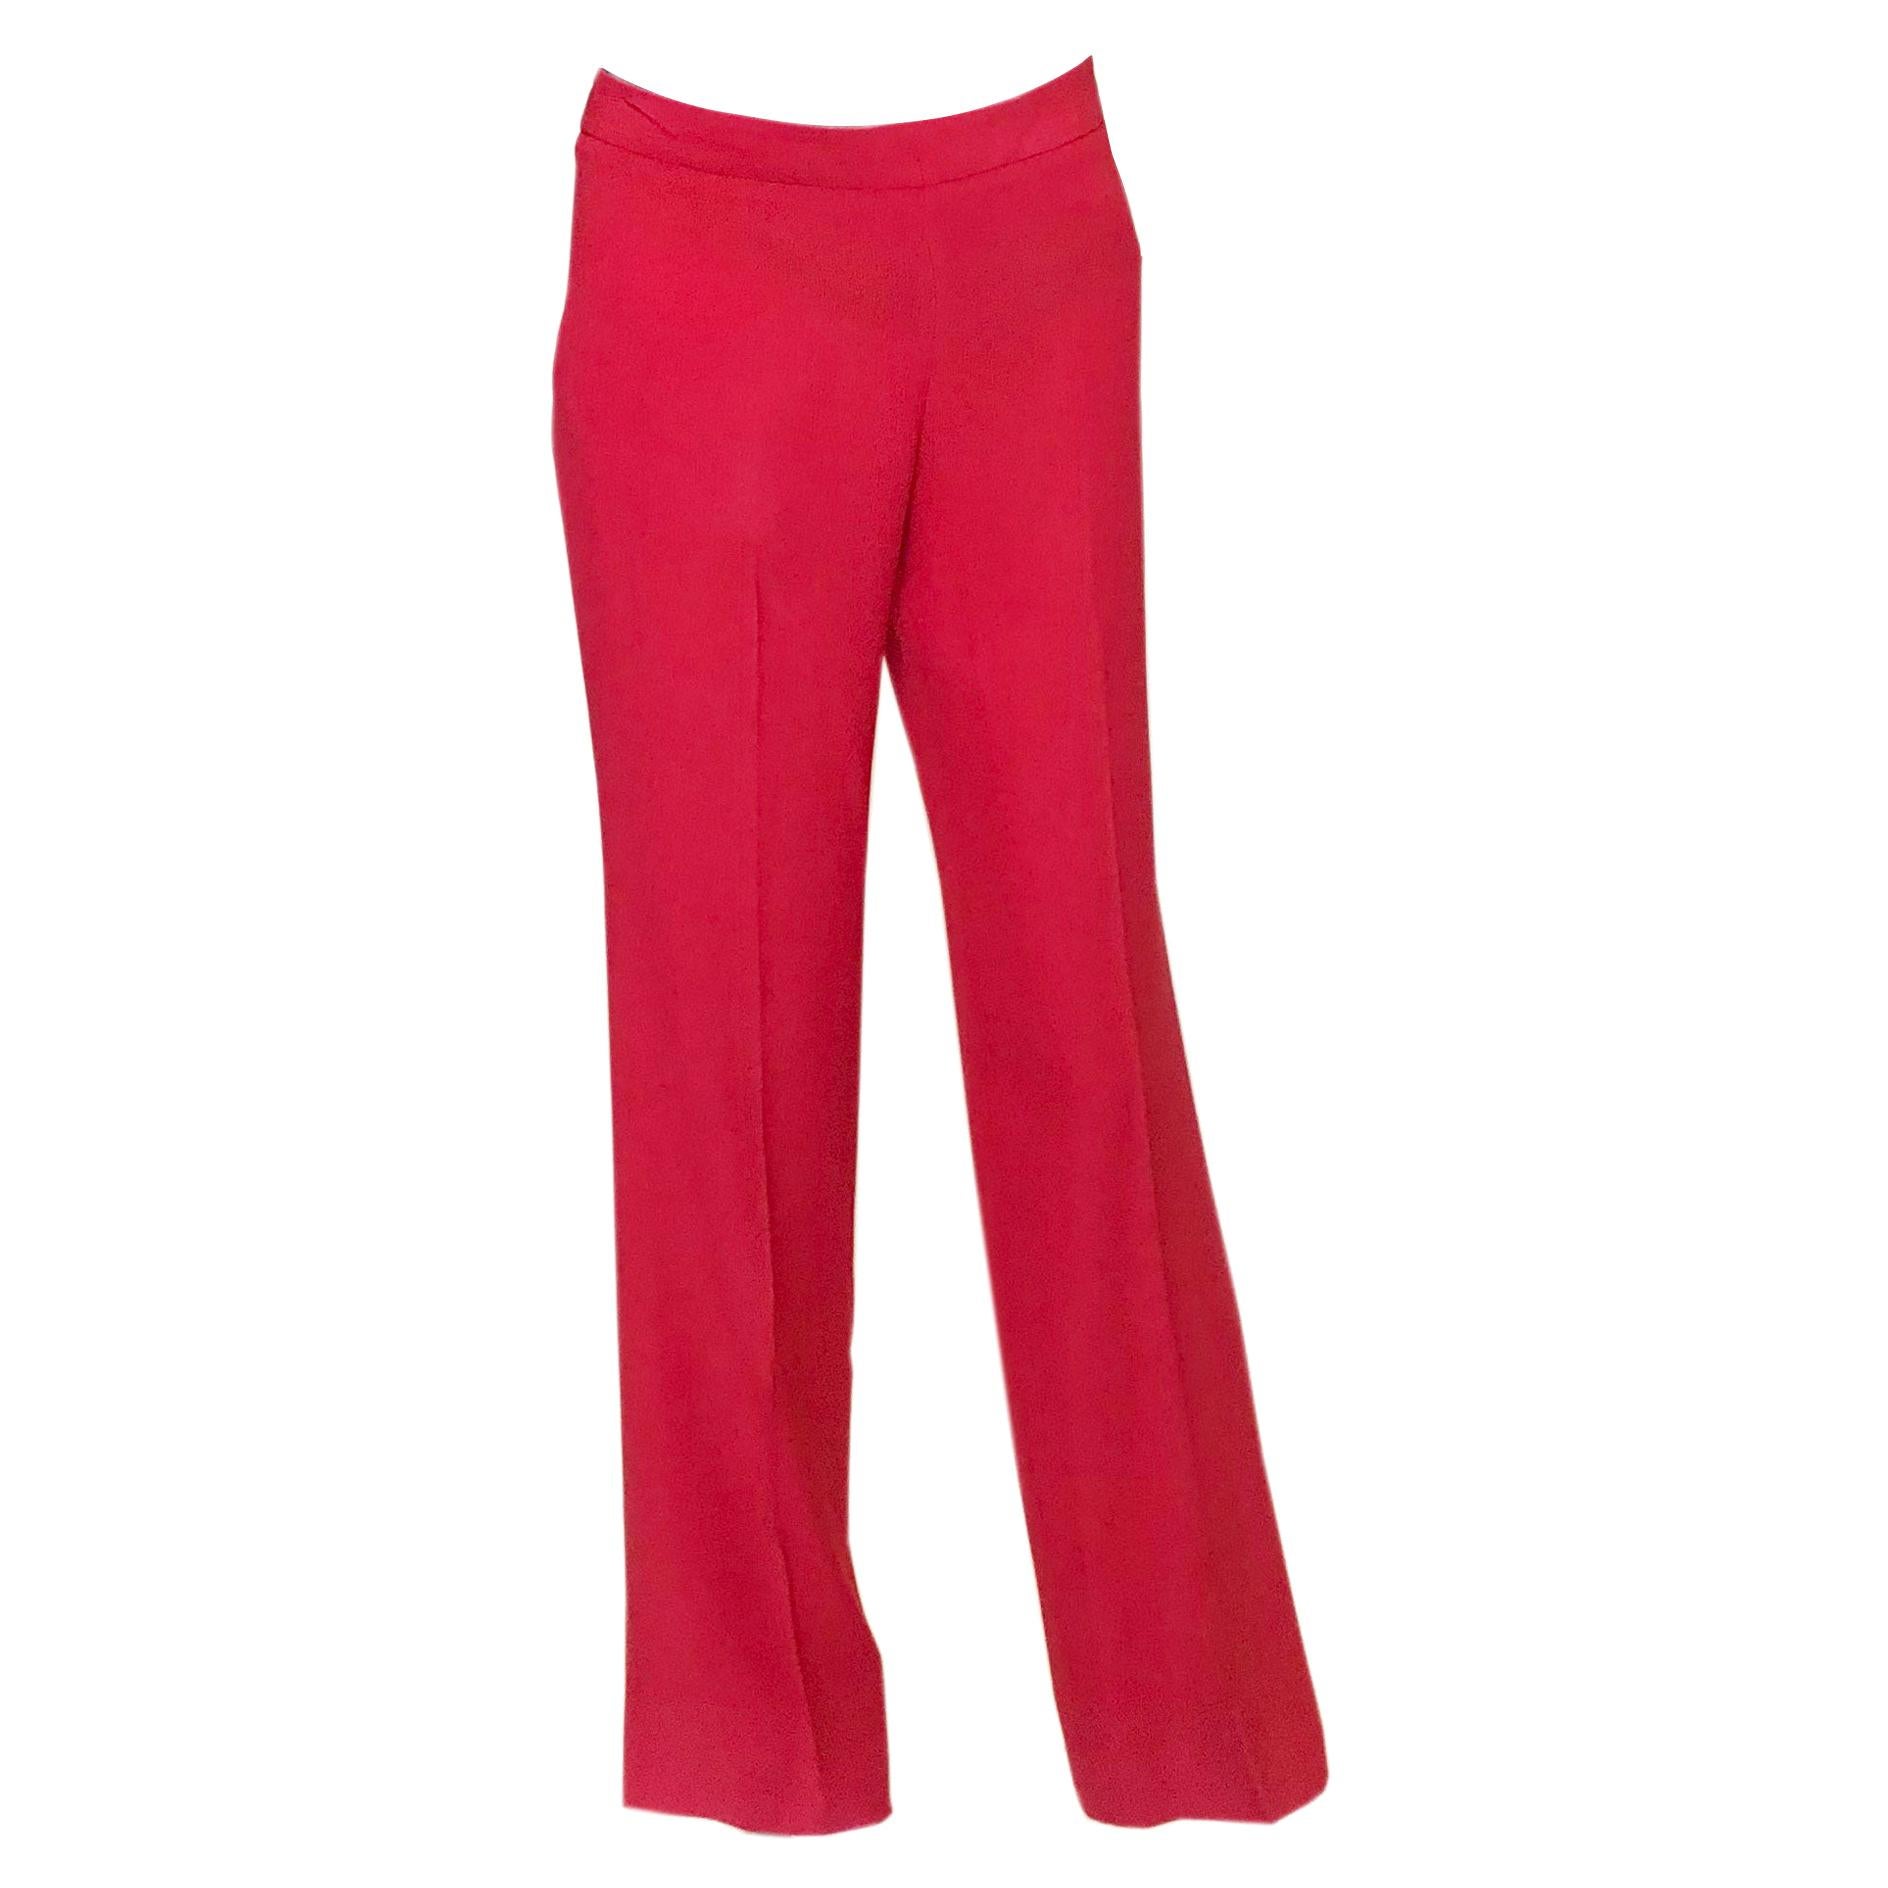 Gucci by Tom Ford Hot Pink Python Print Bell Bottom Pants, c. 2000 at ...